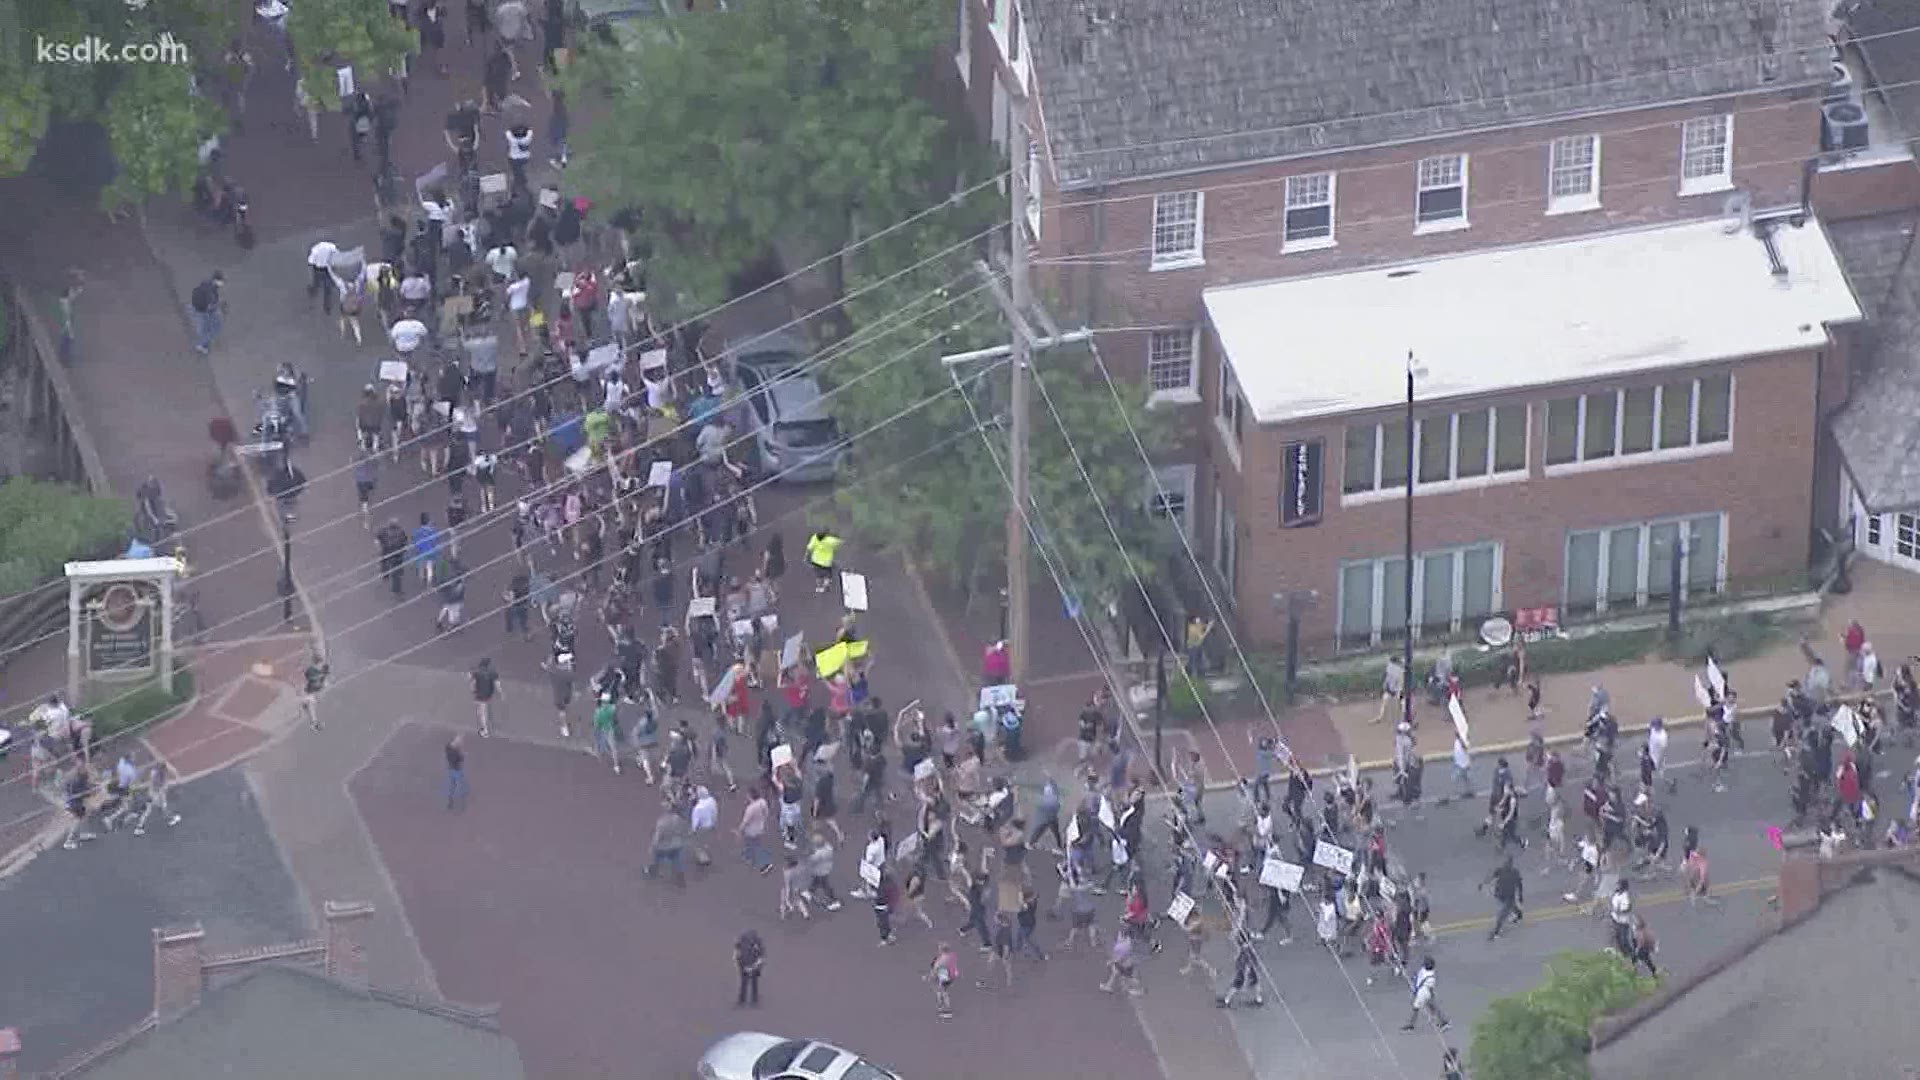 The police are walking with protesters along Main Street in St. Charles.